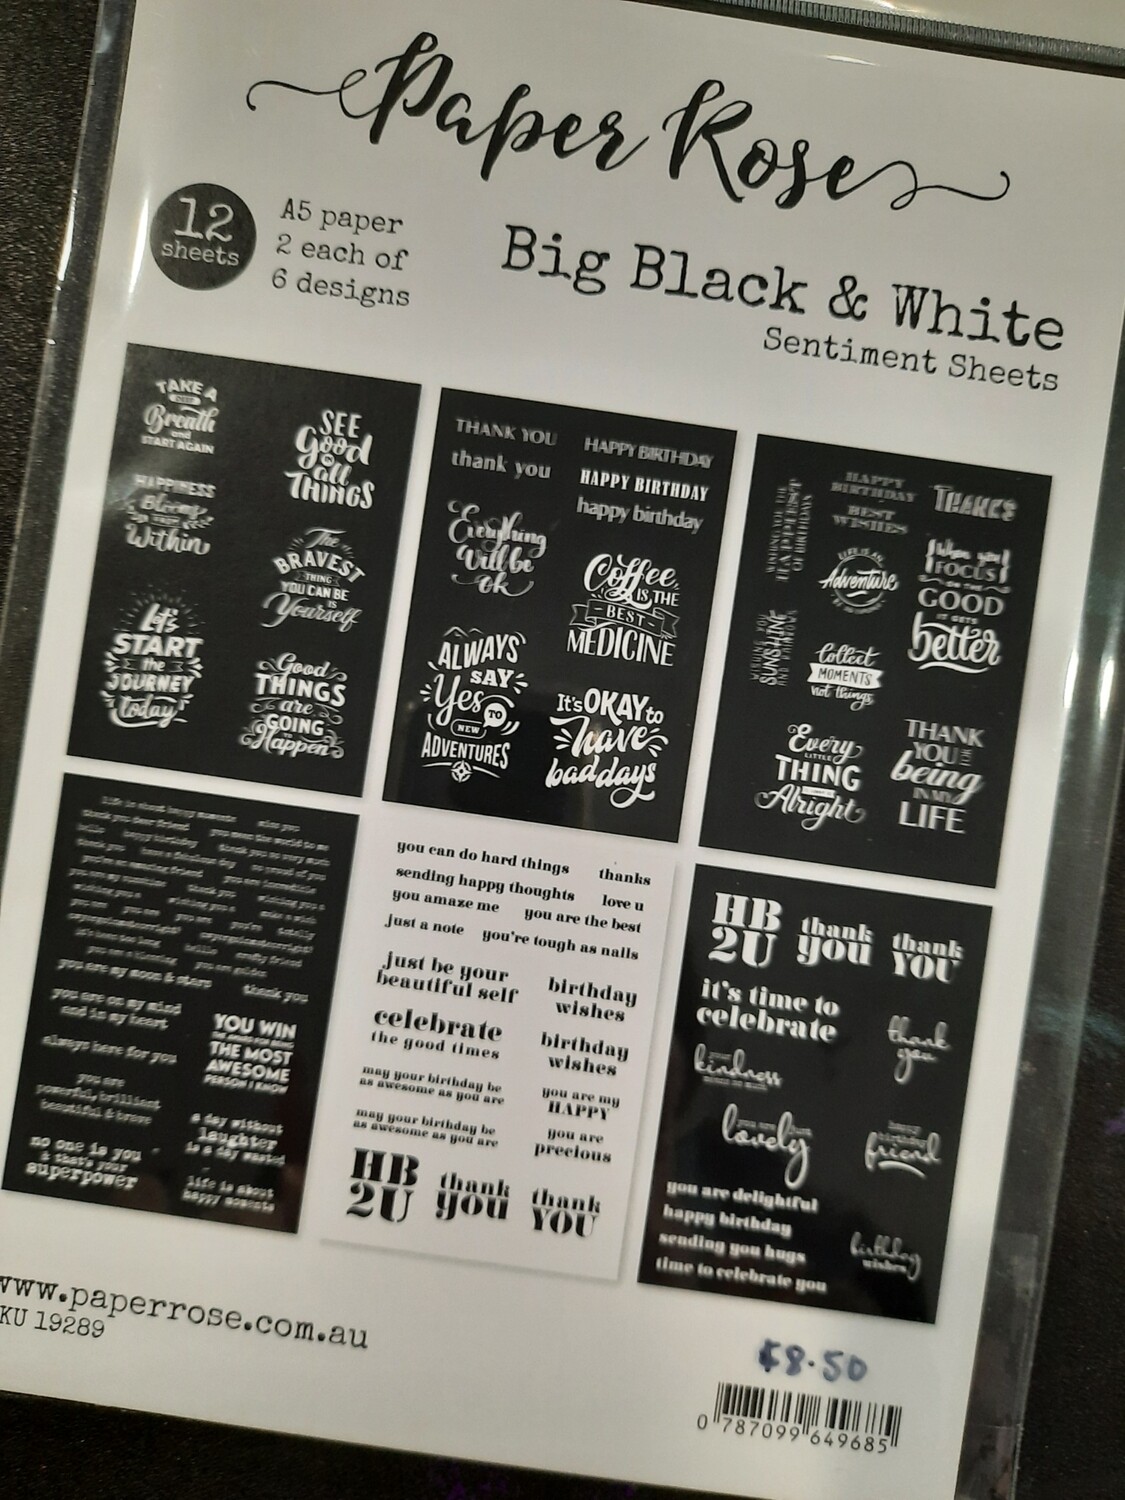 Big Black and White Sentiment Sheets